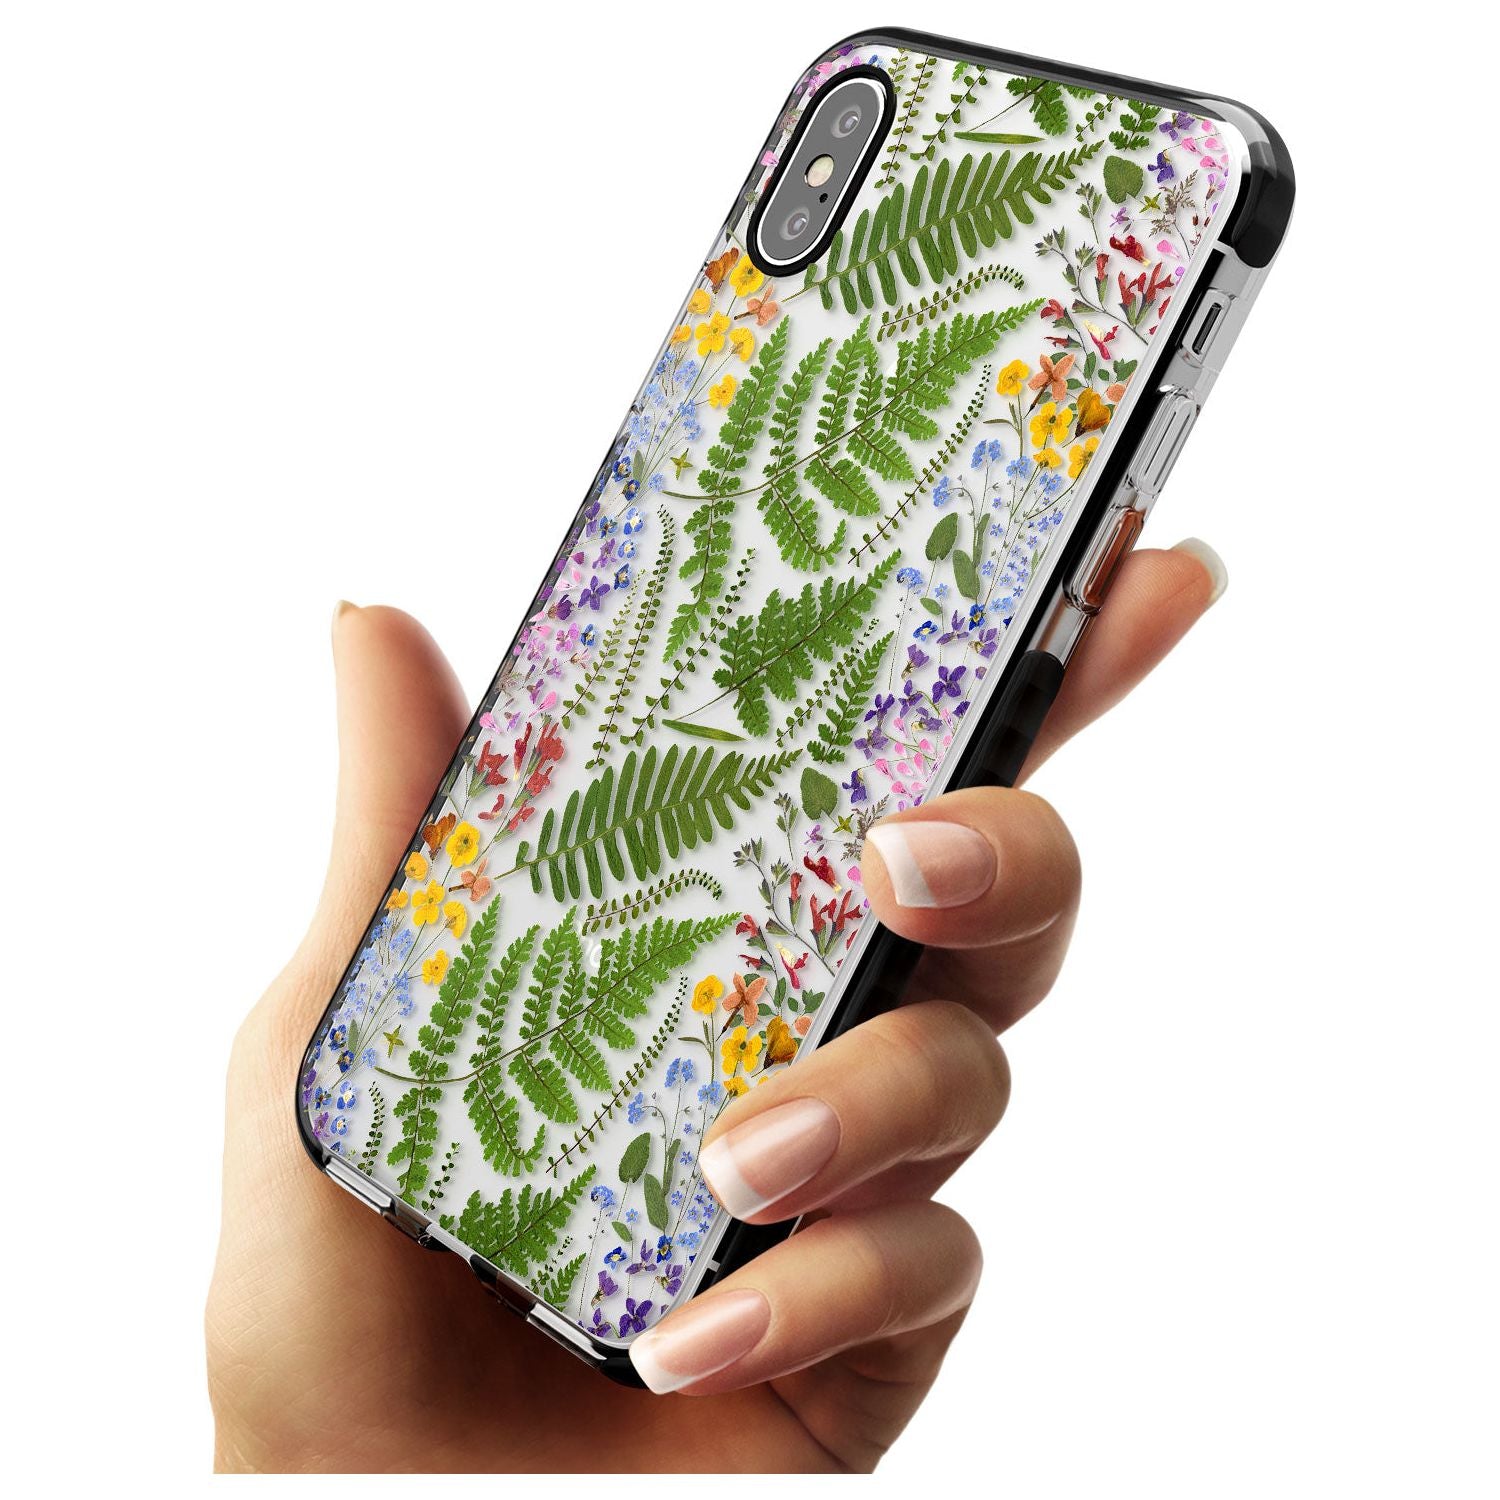 Busy Floral and Fern Design Black Impact Phone Case for iPhone X XS Max XR